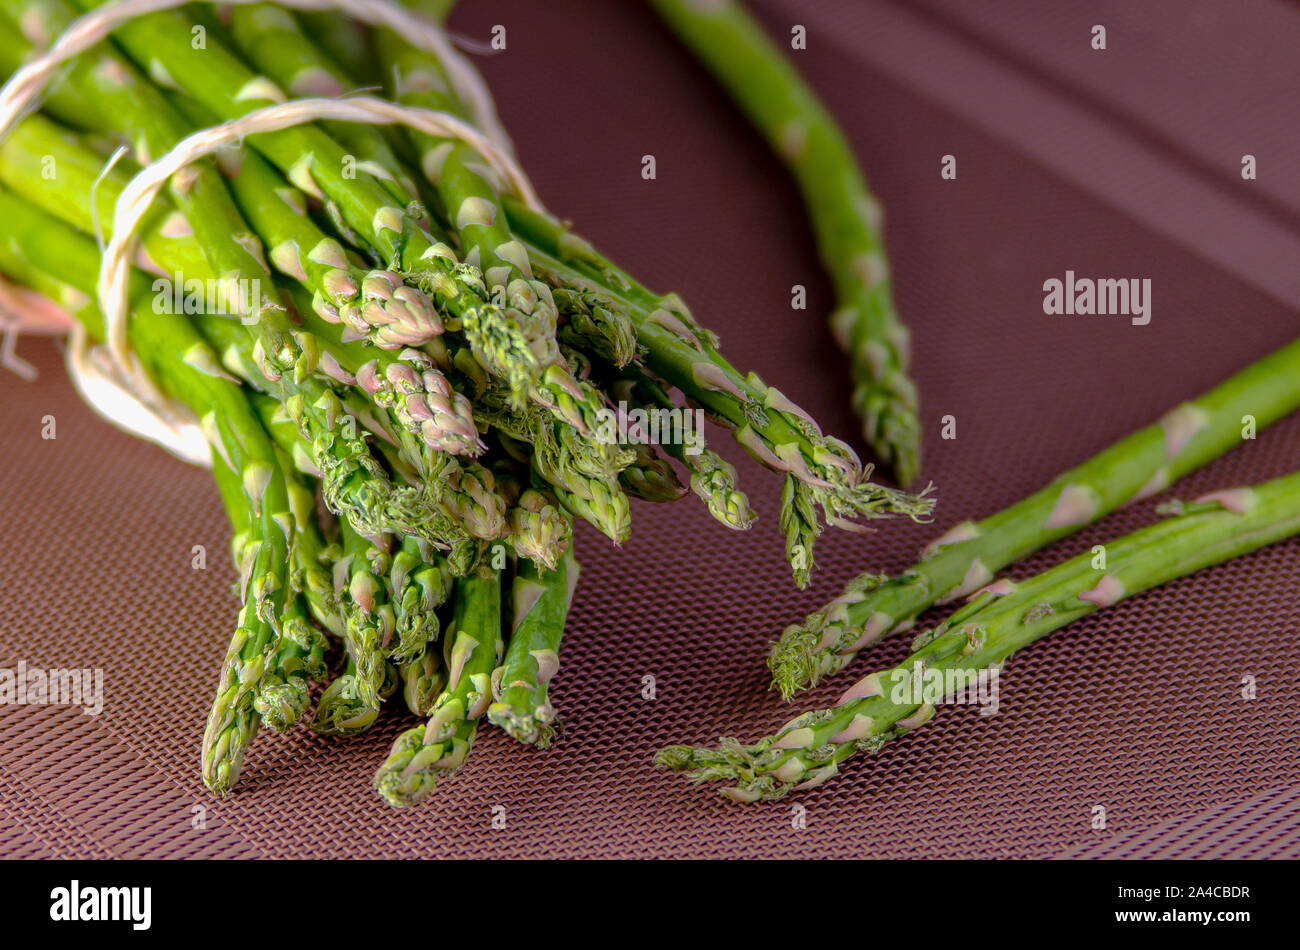 Fresh green asparagus on wooden table Stock Photo